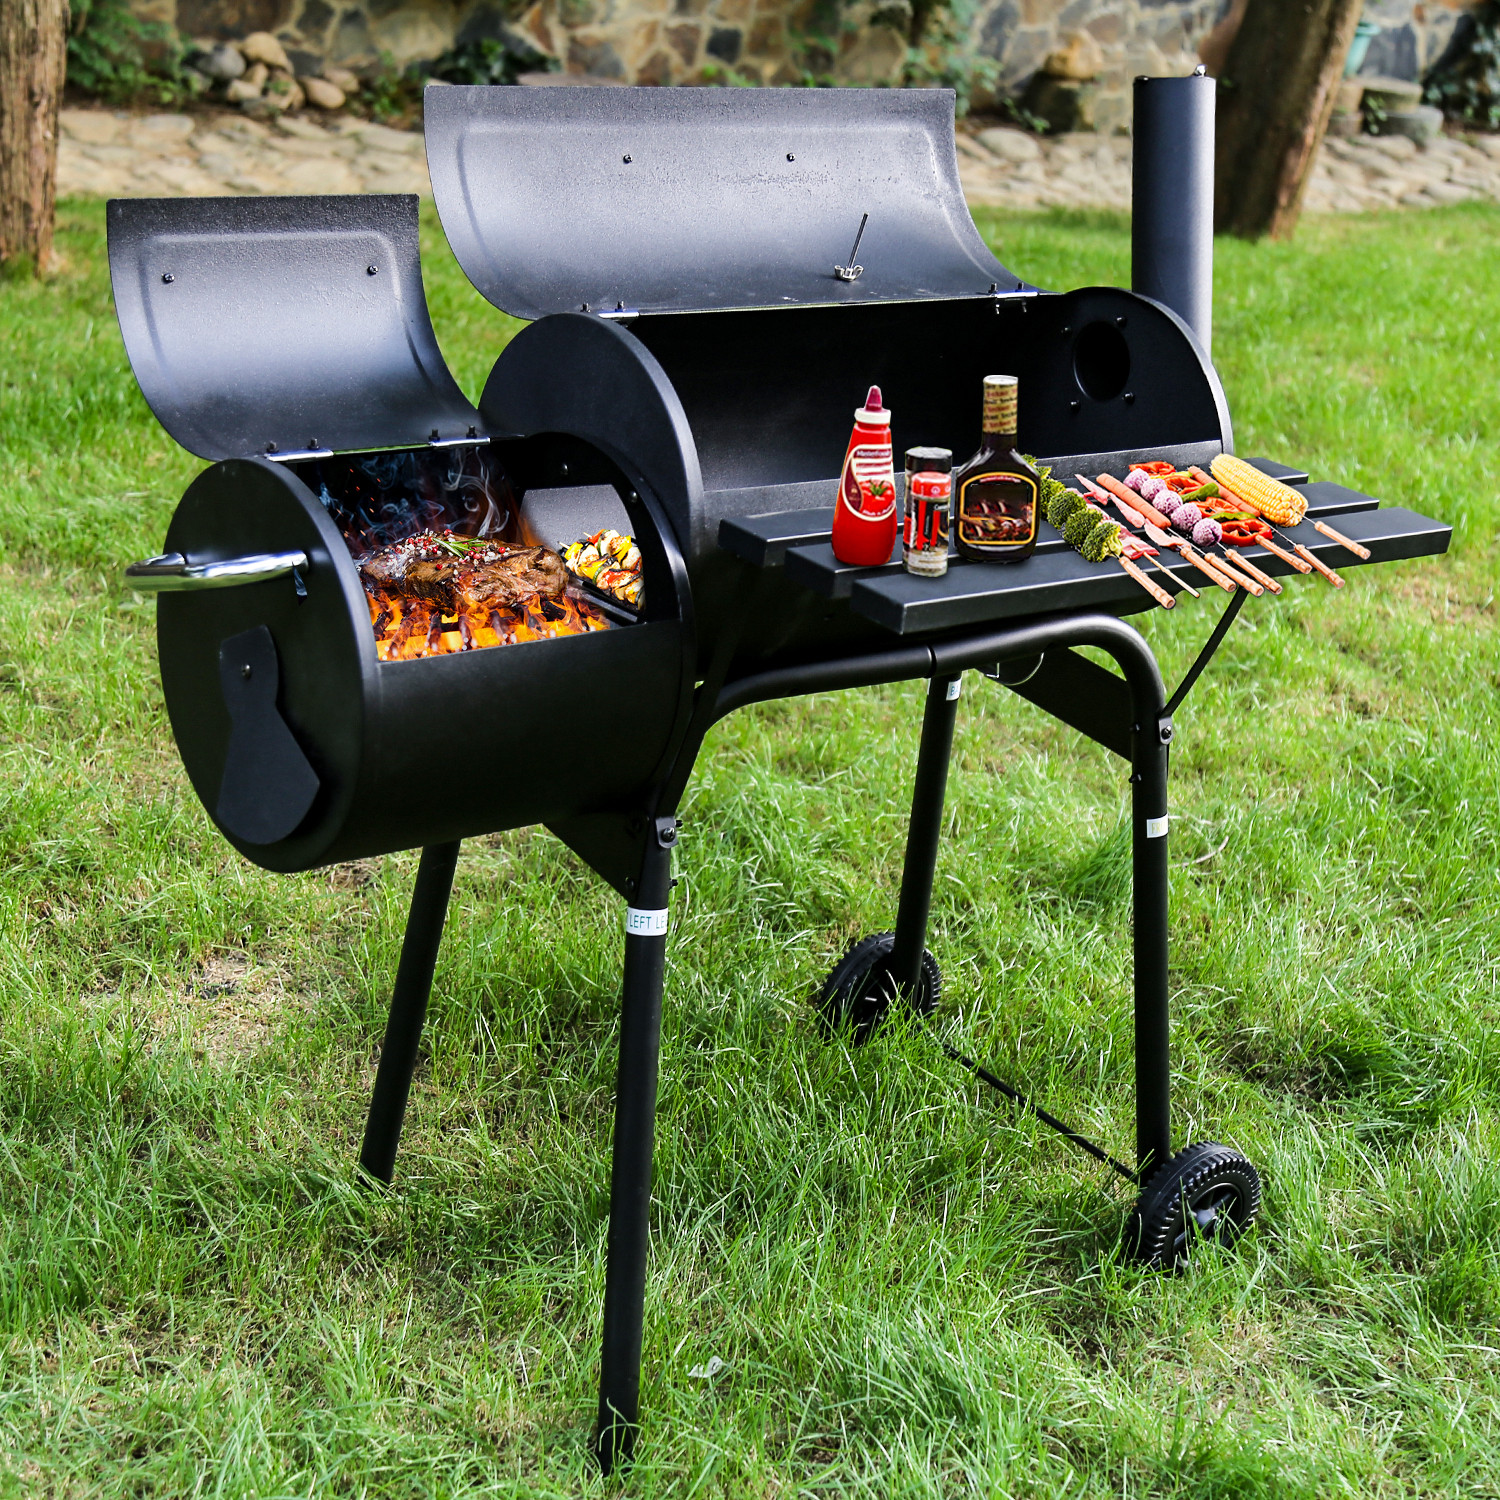 Backyard Grill Grills
 BBQ Grill Charcoal Barbecue Outdoor Pit Patio Backyard